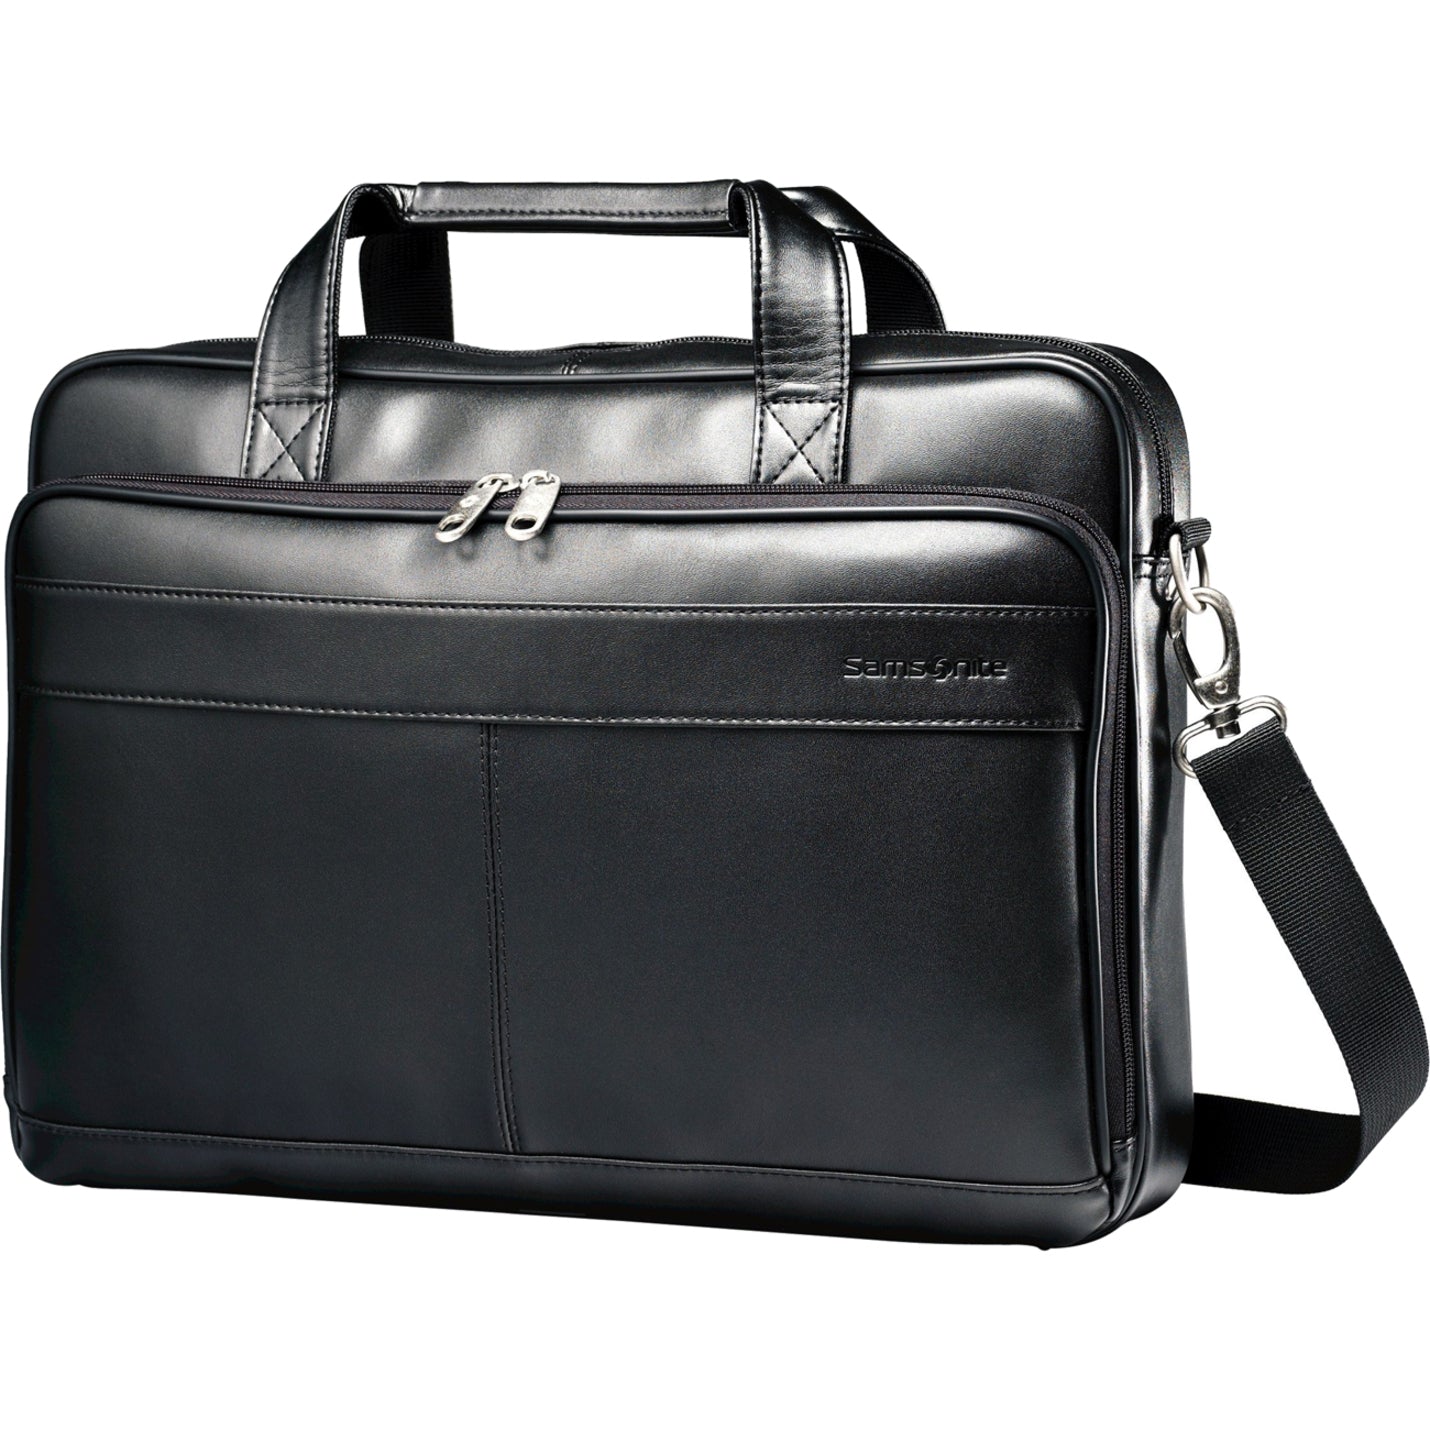 Samsonite 48073-1041 Leather Slim Brief Case, 2-1/2"x15-3/4"x11-3/5", Black - Padded Shoulder Strap, Checkpoint Friendly, Fits up to 15.6" Notebook